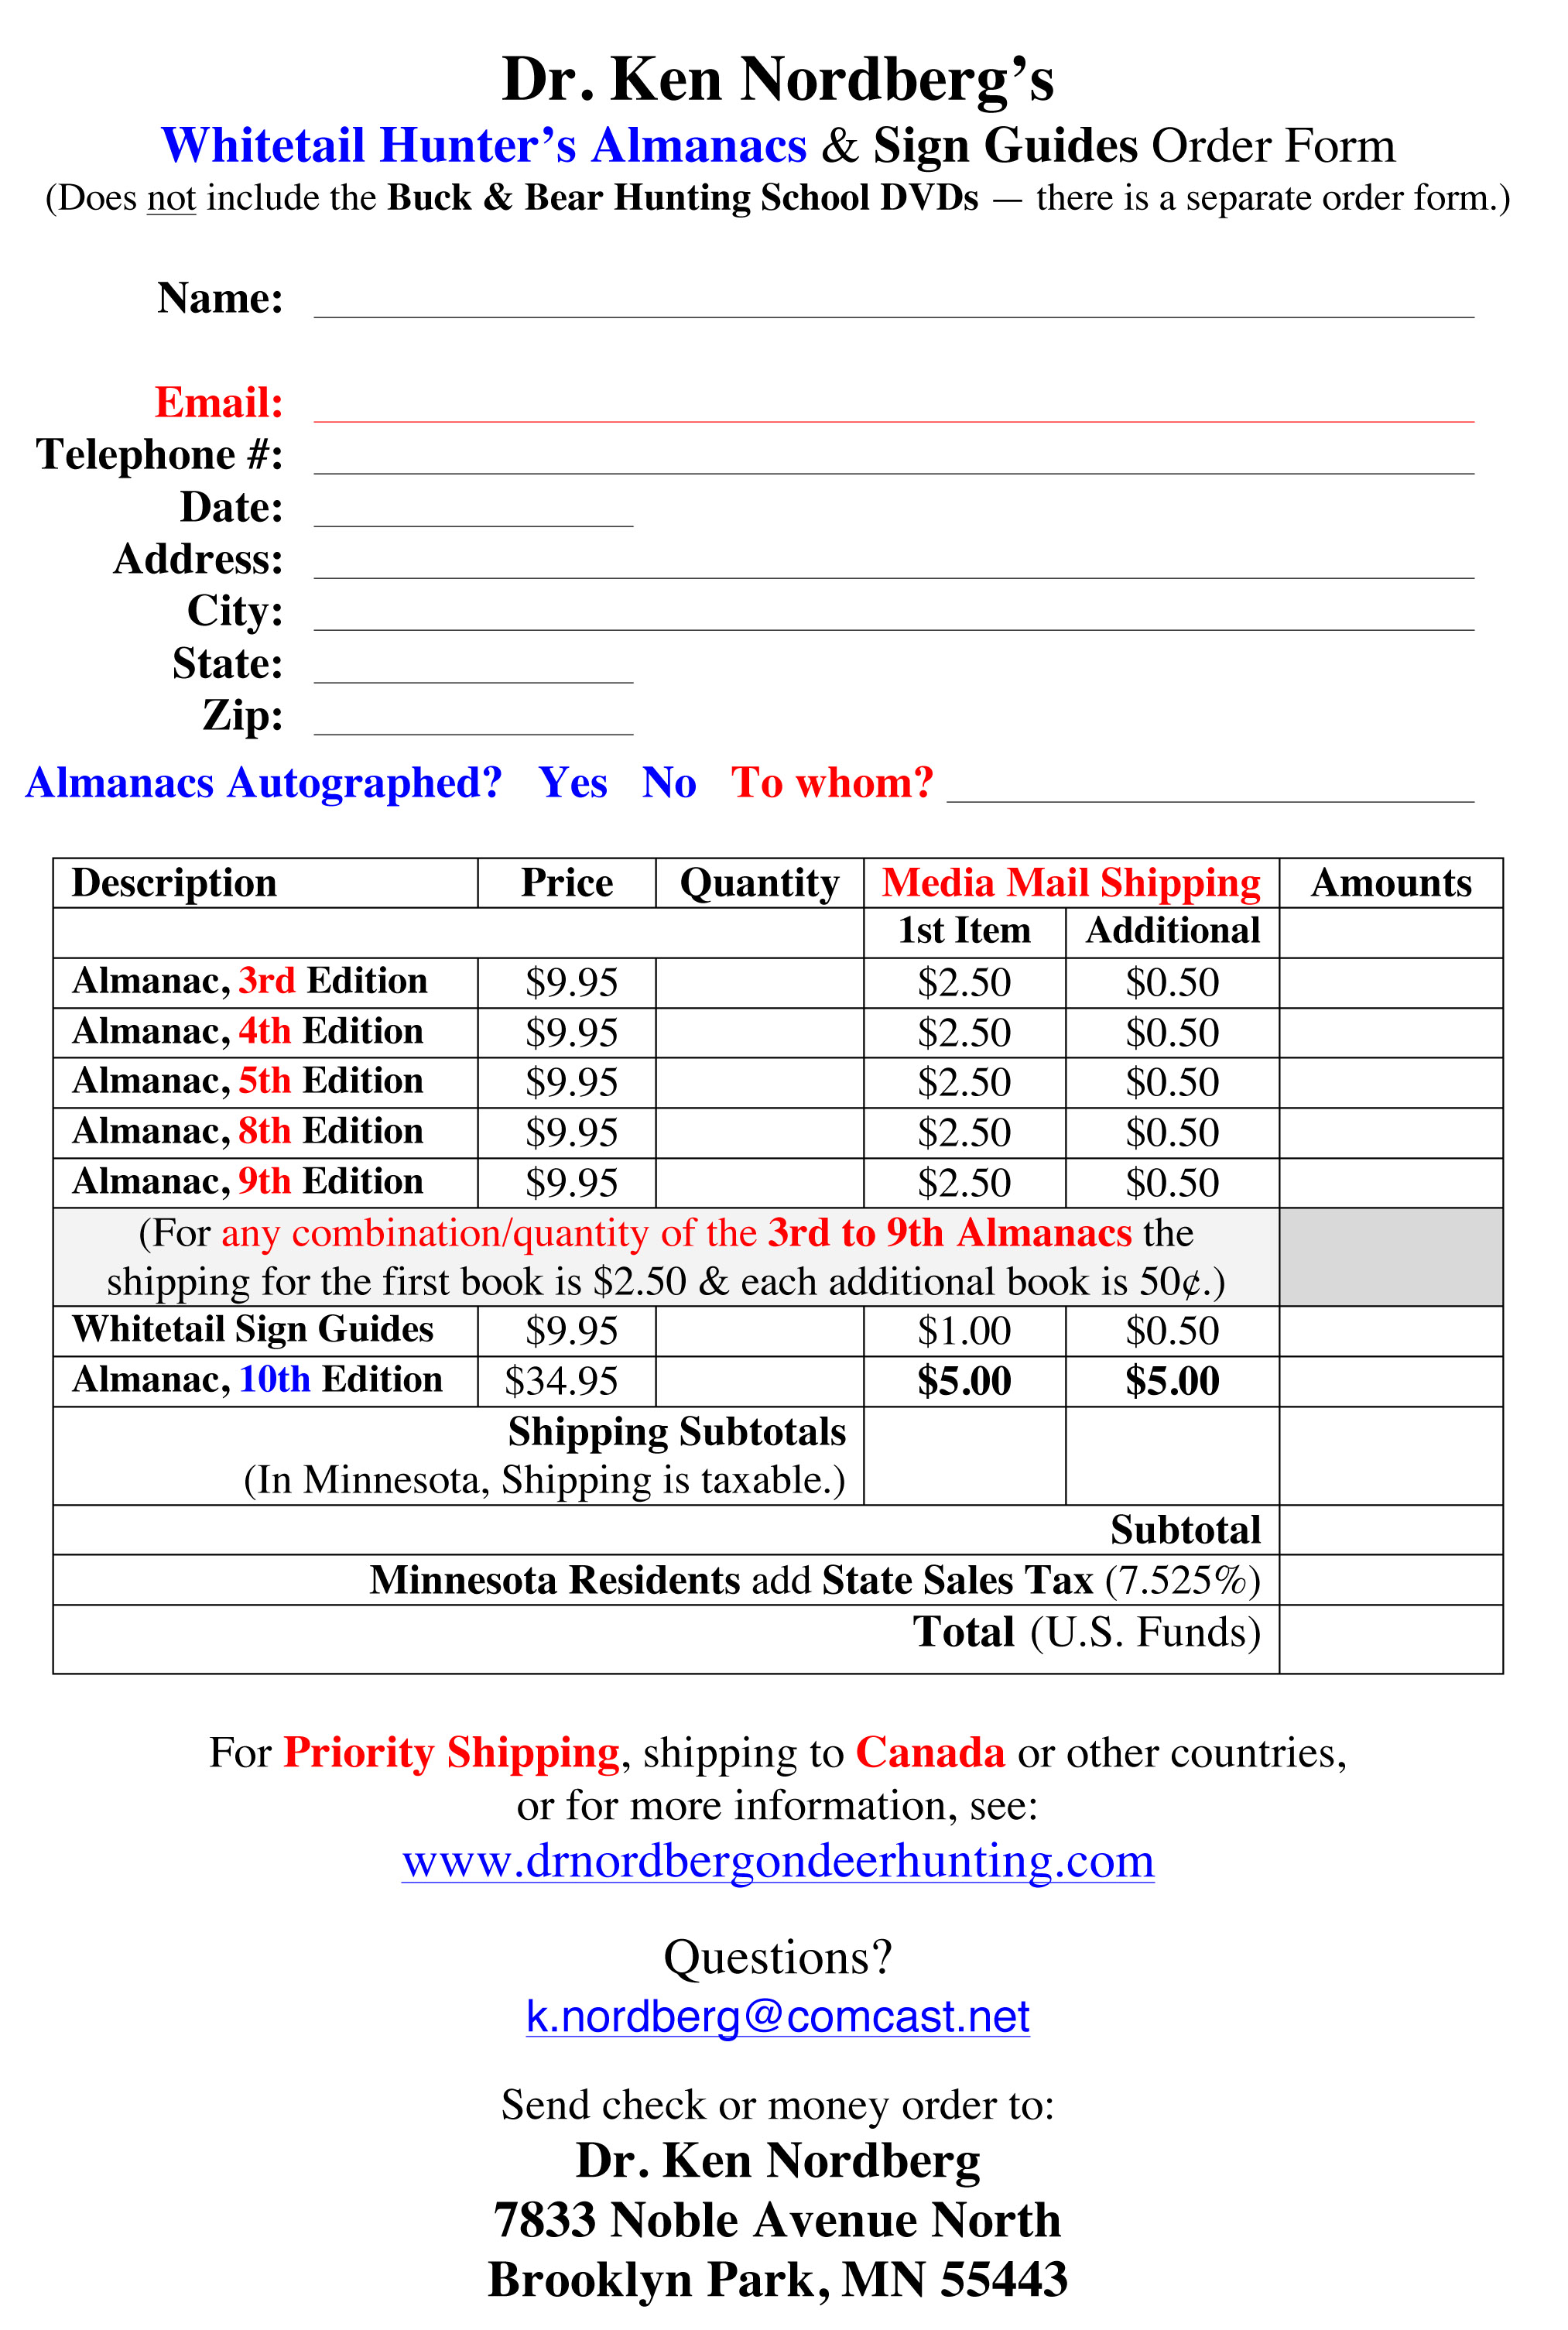 Order form for purchasing Whitetail Hunter's Alamanacs and Sign Guides from Dr. Ken Nordberg